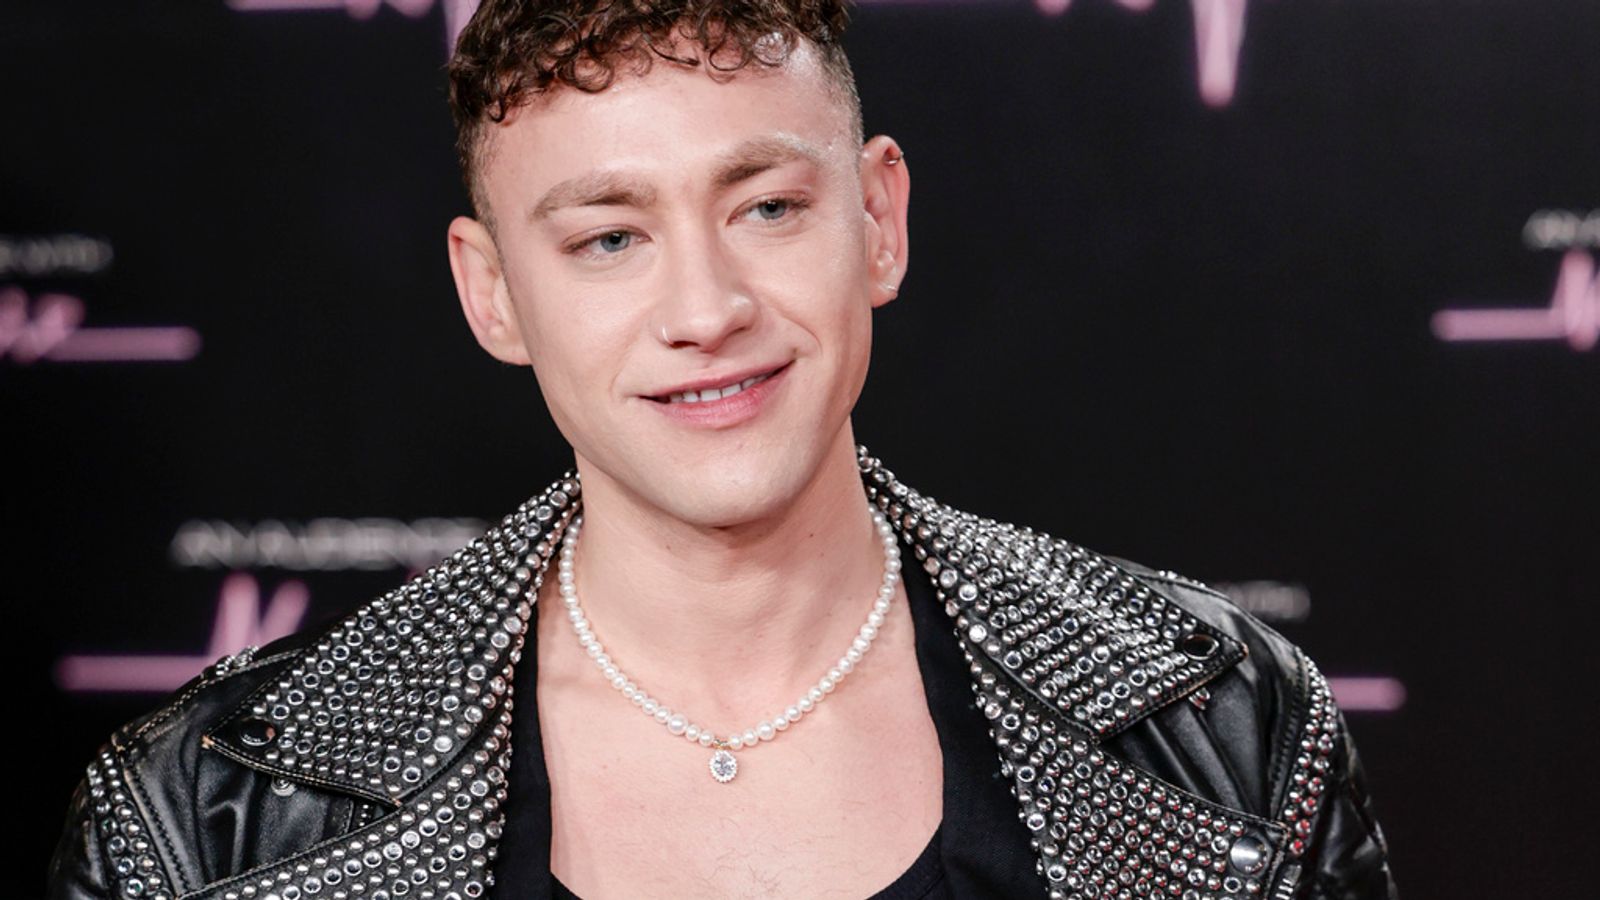 UK Eurovision act Olly Alexander criticised for signing statement calling Israel an 'apartheid state' and accusing it of genocide